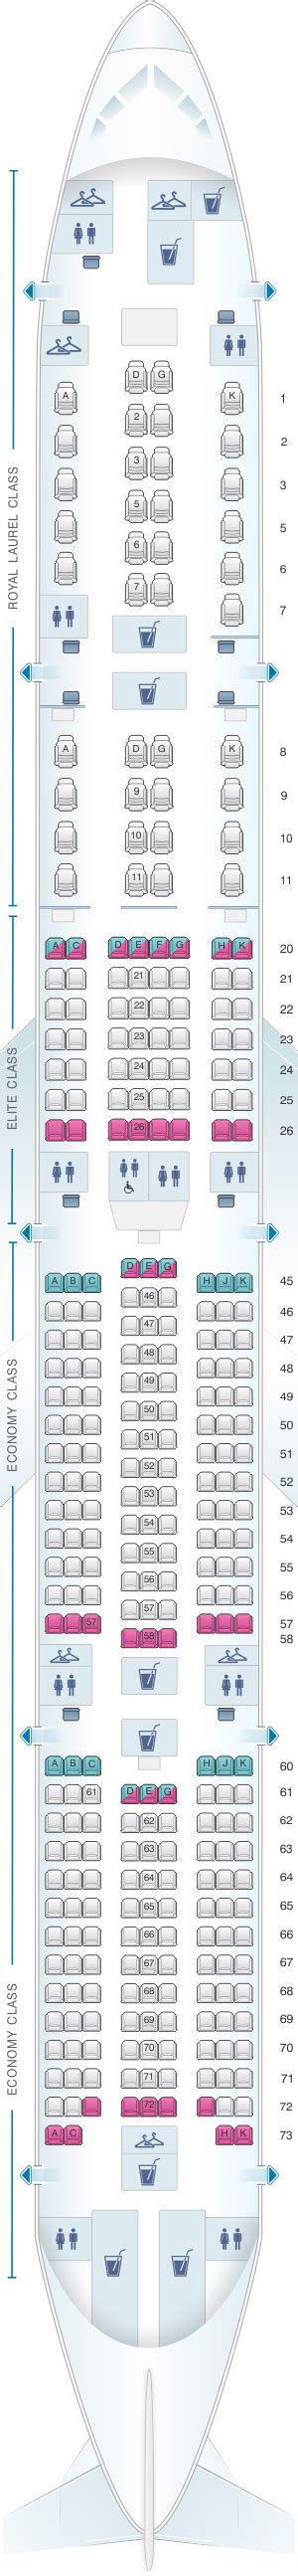 Seat map eva air 777 - 56. Economy. Standard seat. 33 0. 18.3. 45-73. 238. Find the best seat wiht our EVA Air Boeing 777-300ER (77W) v1 seating chart. Use this seat map to get the most comfortable seats, legroom and recline before booking. 